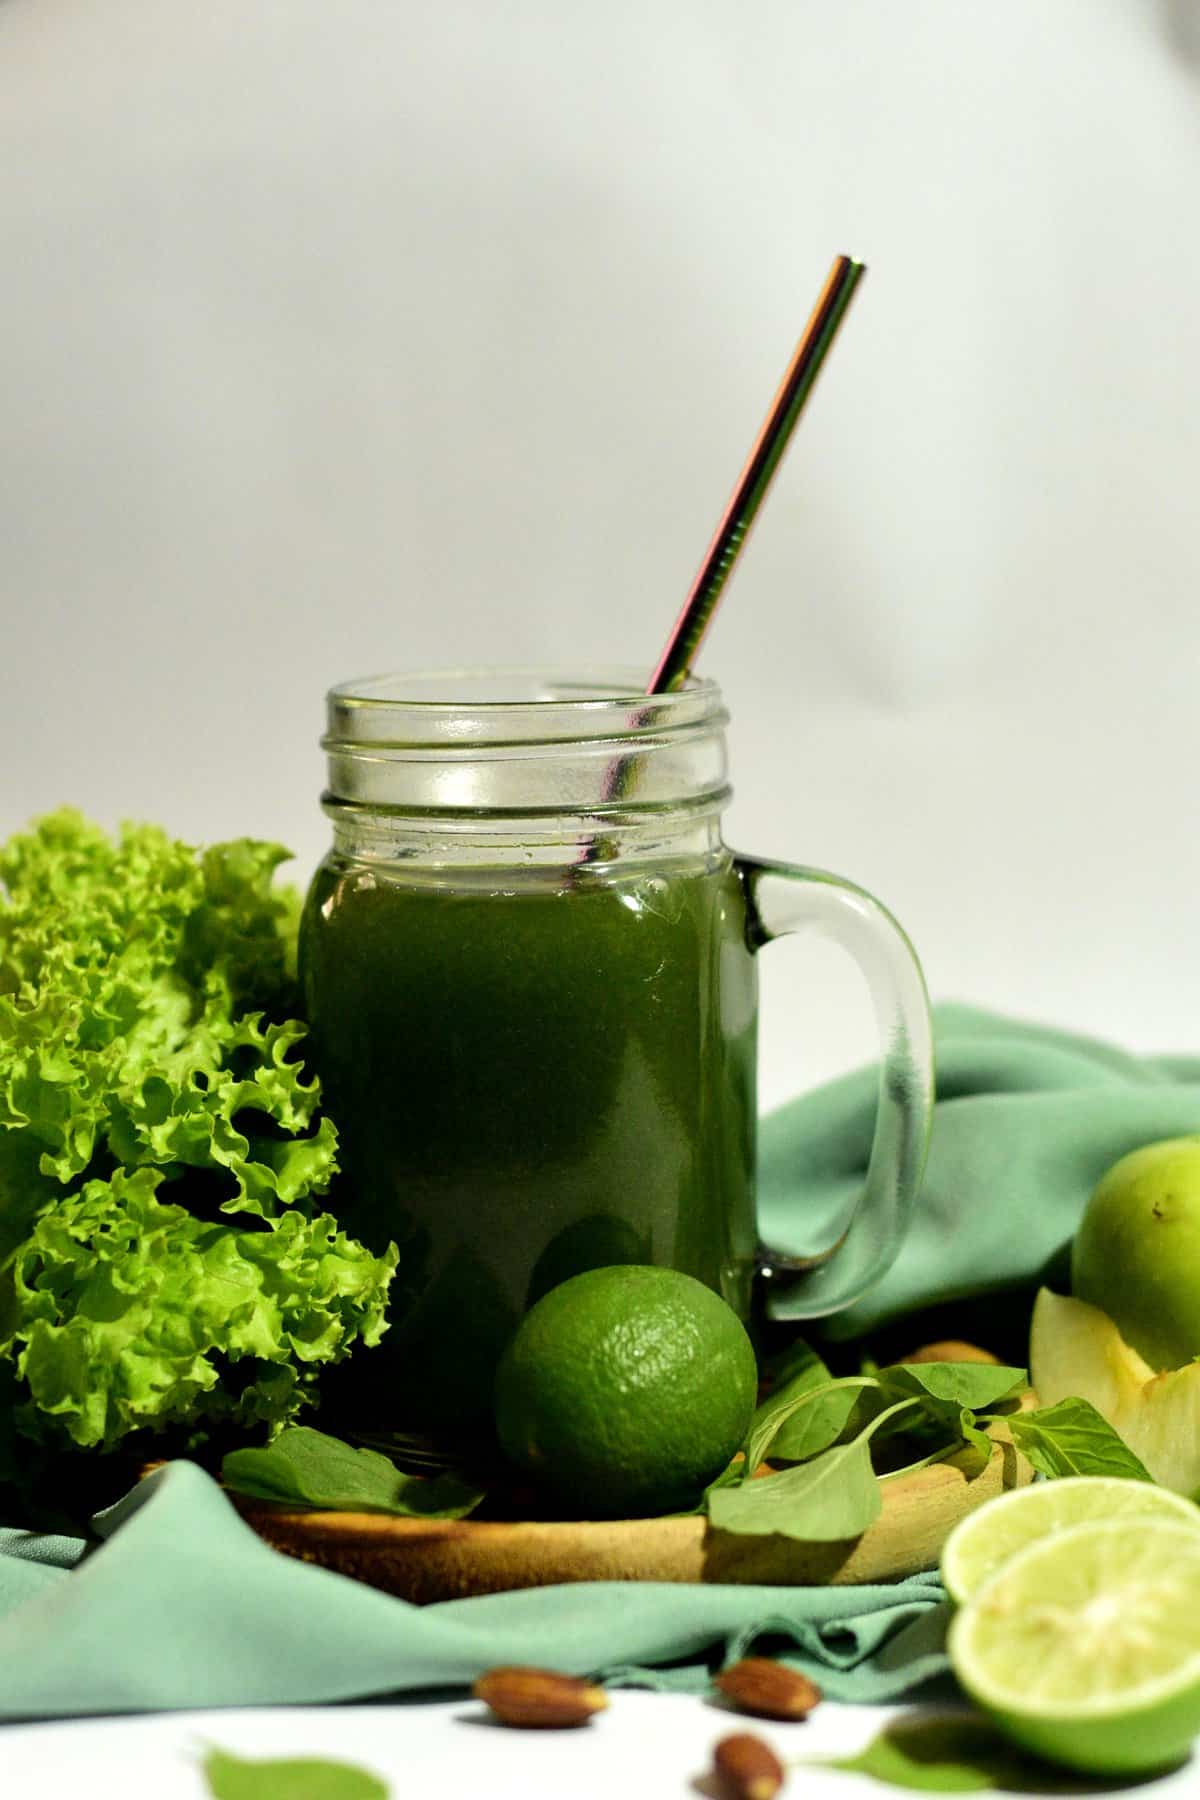 Glass mug of AG1 greens as a health and wellness trend, next to kale, limes and other green produce.